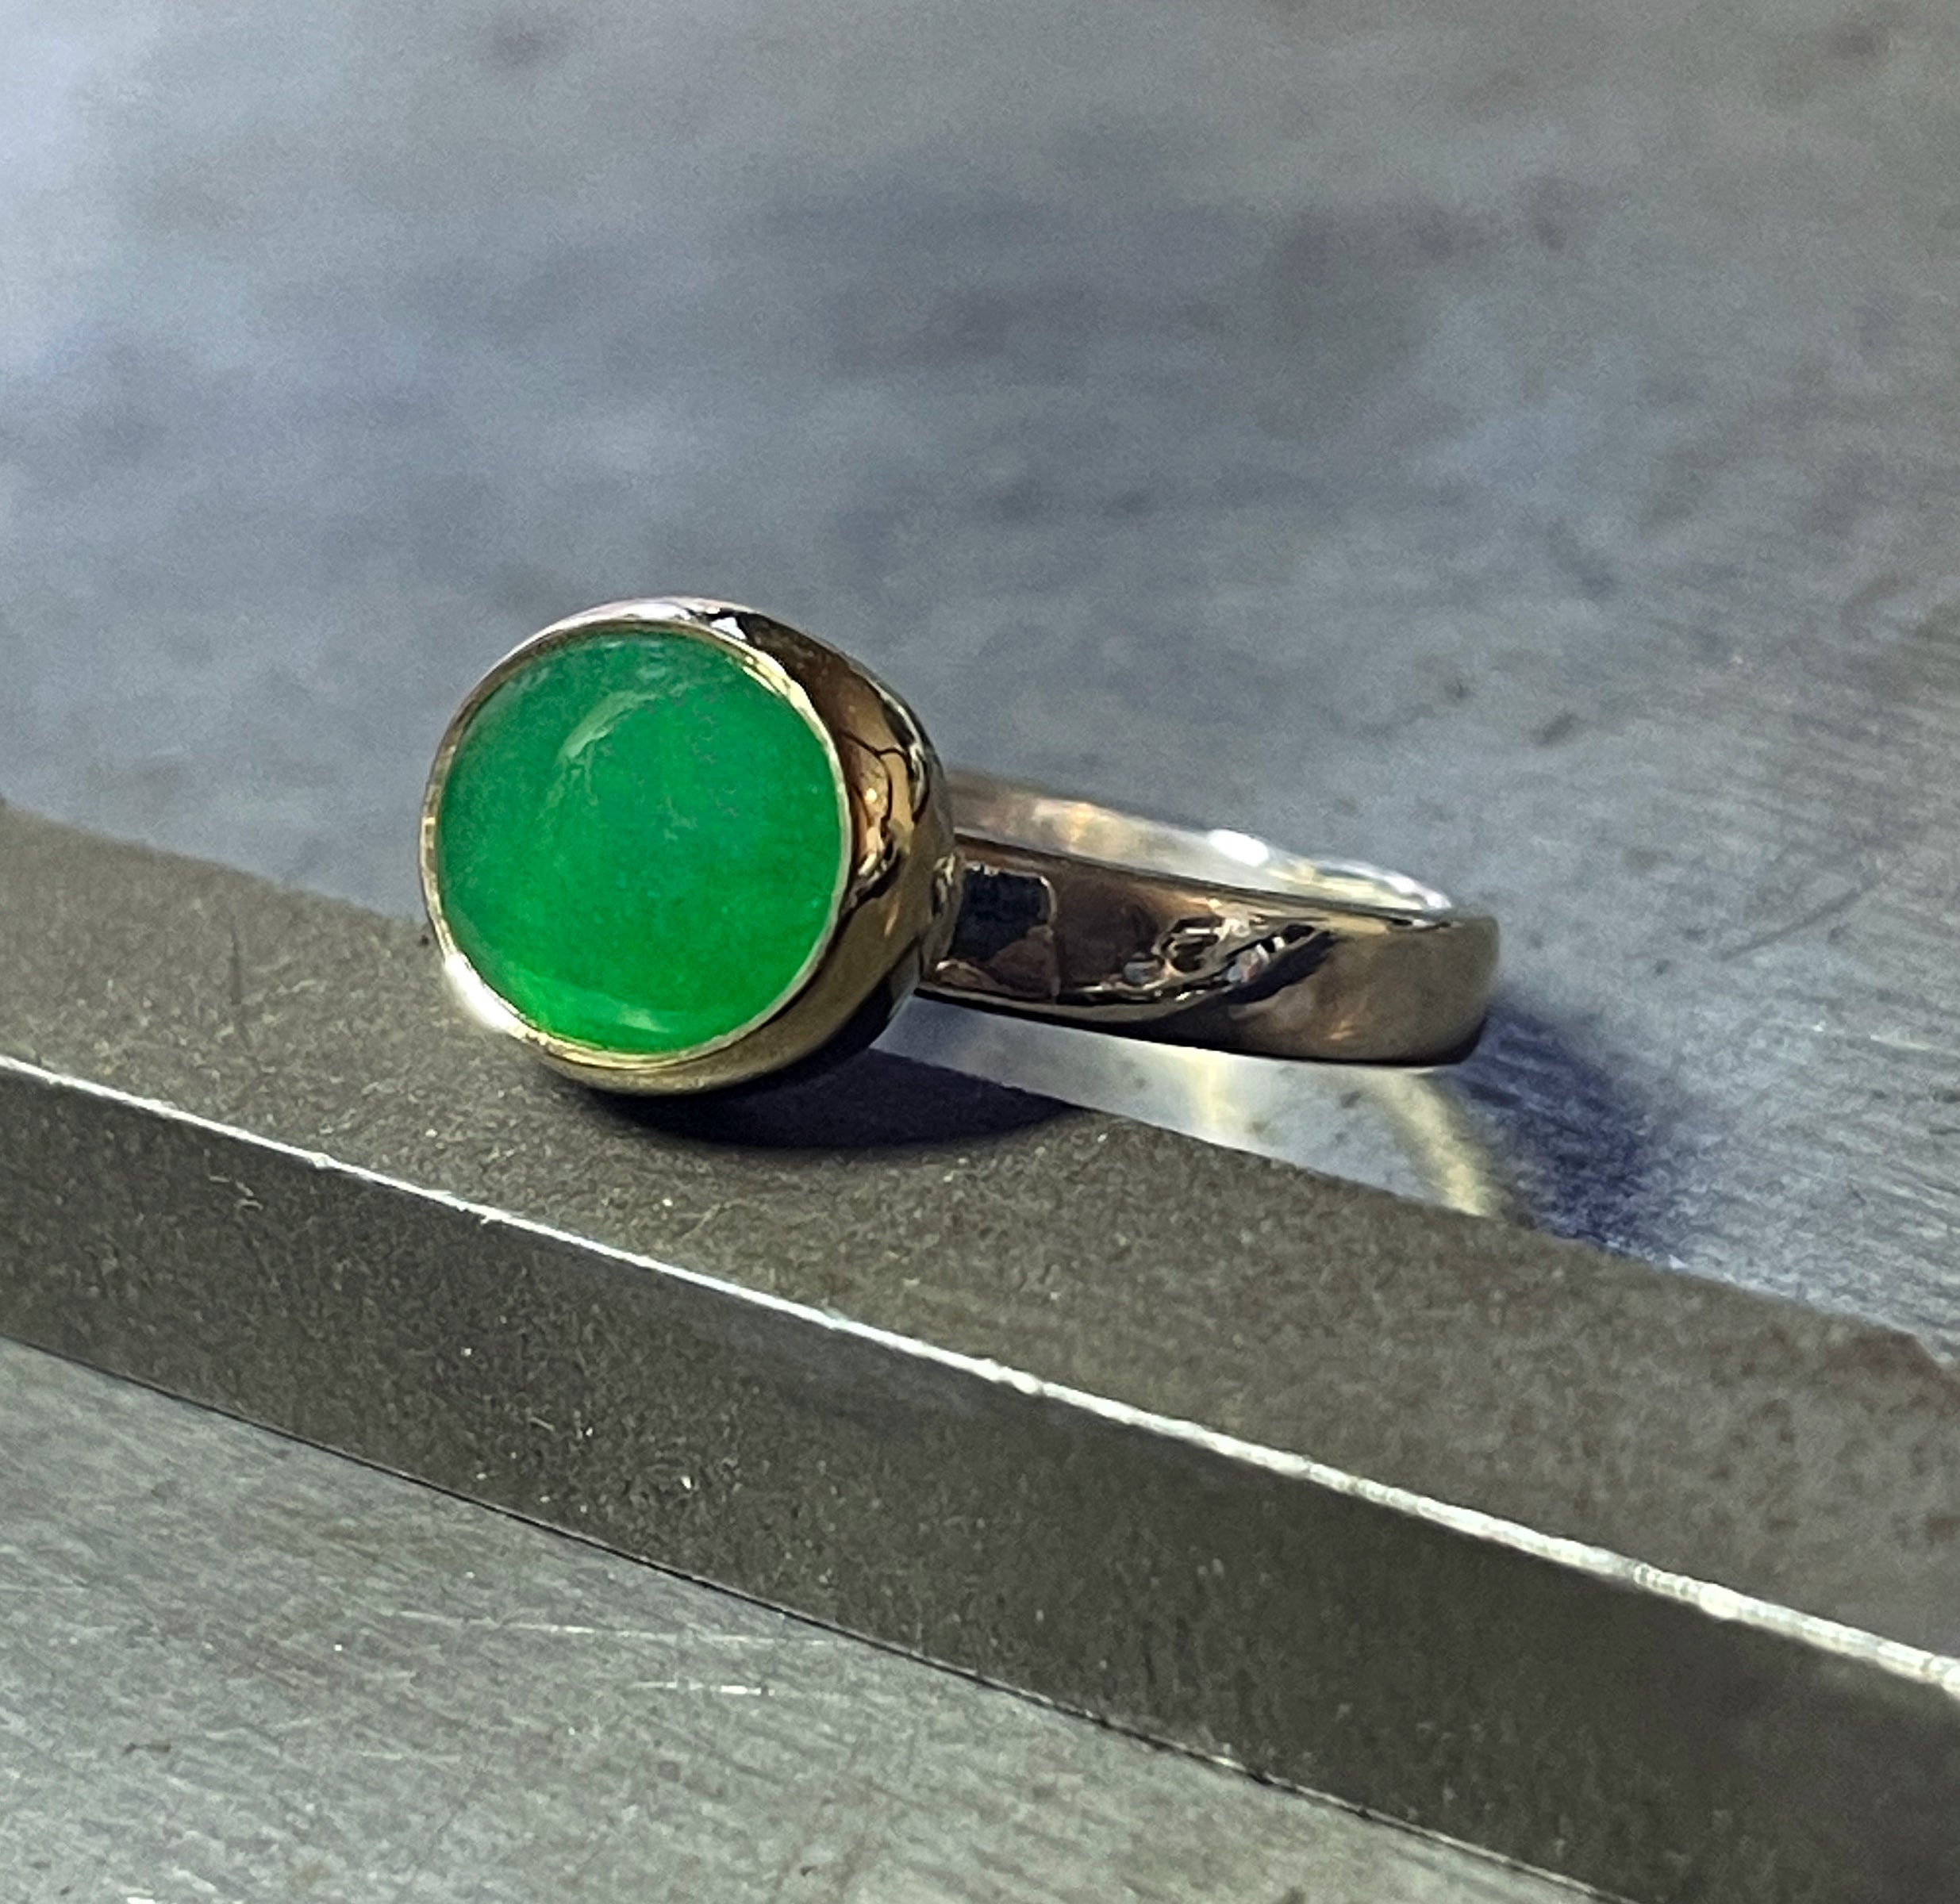 Jade Ring, Imperial Jade Ring in 14k Gold and Sterling Silver, Emerald Green Jade Stacking Ring, Gift for Her, Mixed Metal Ring